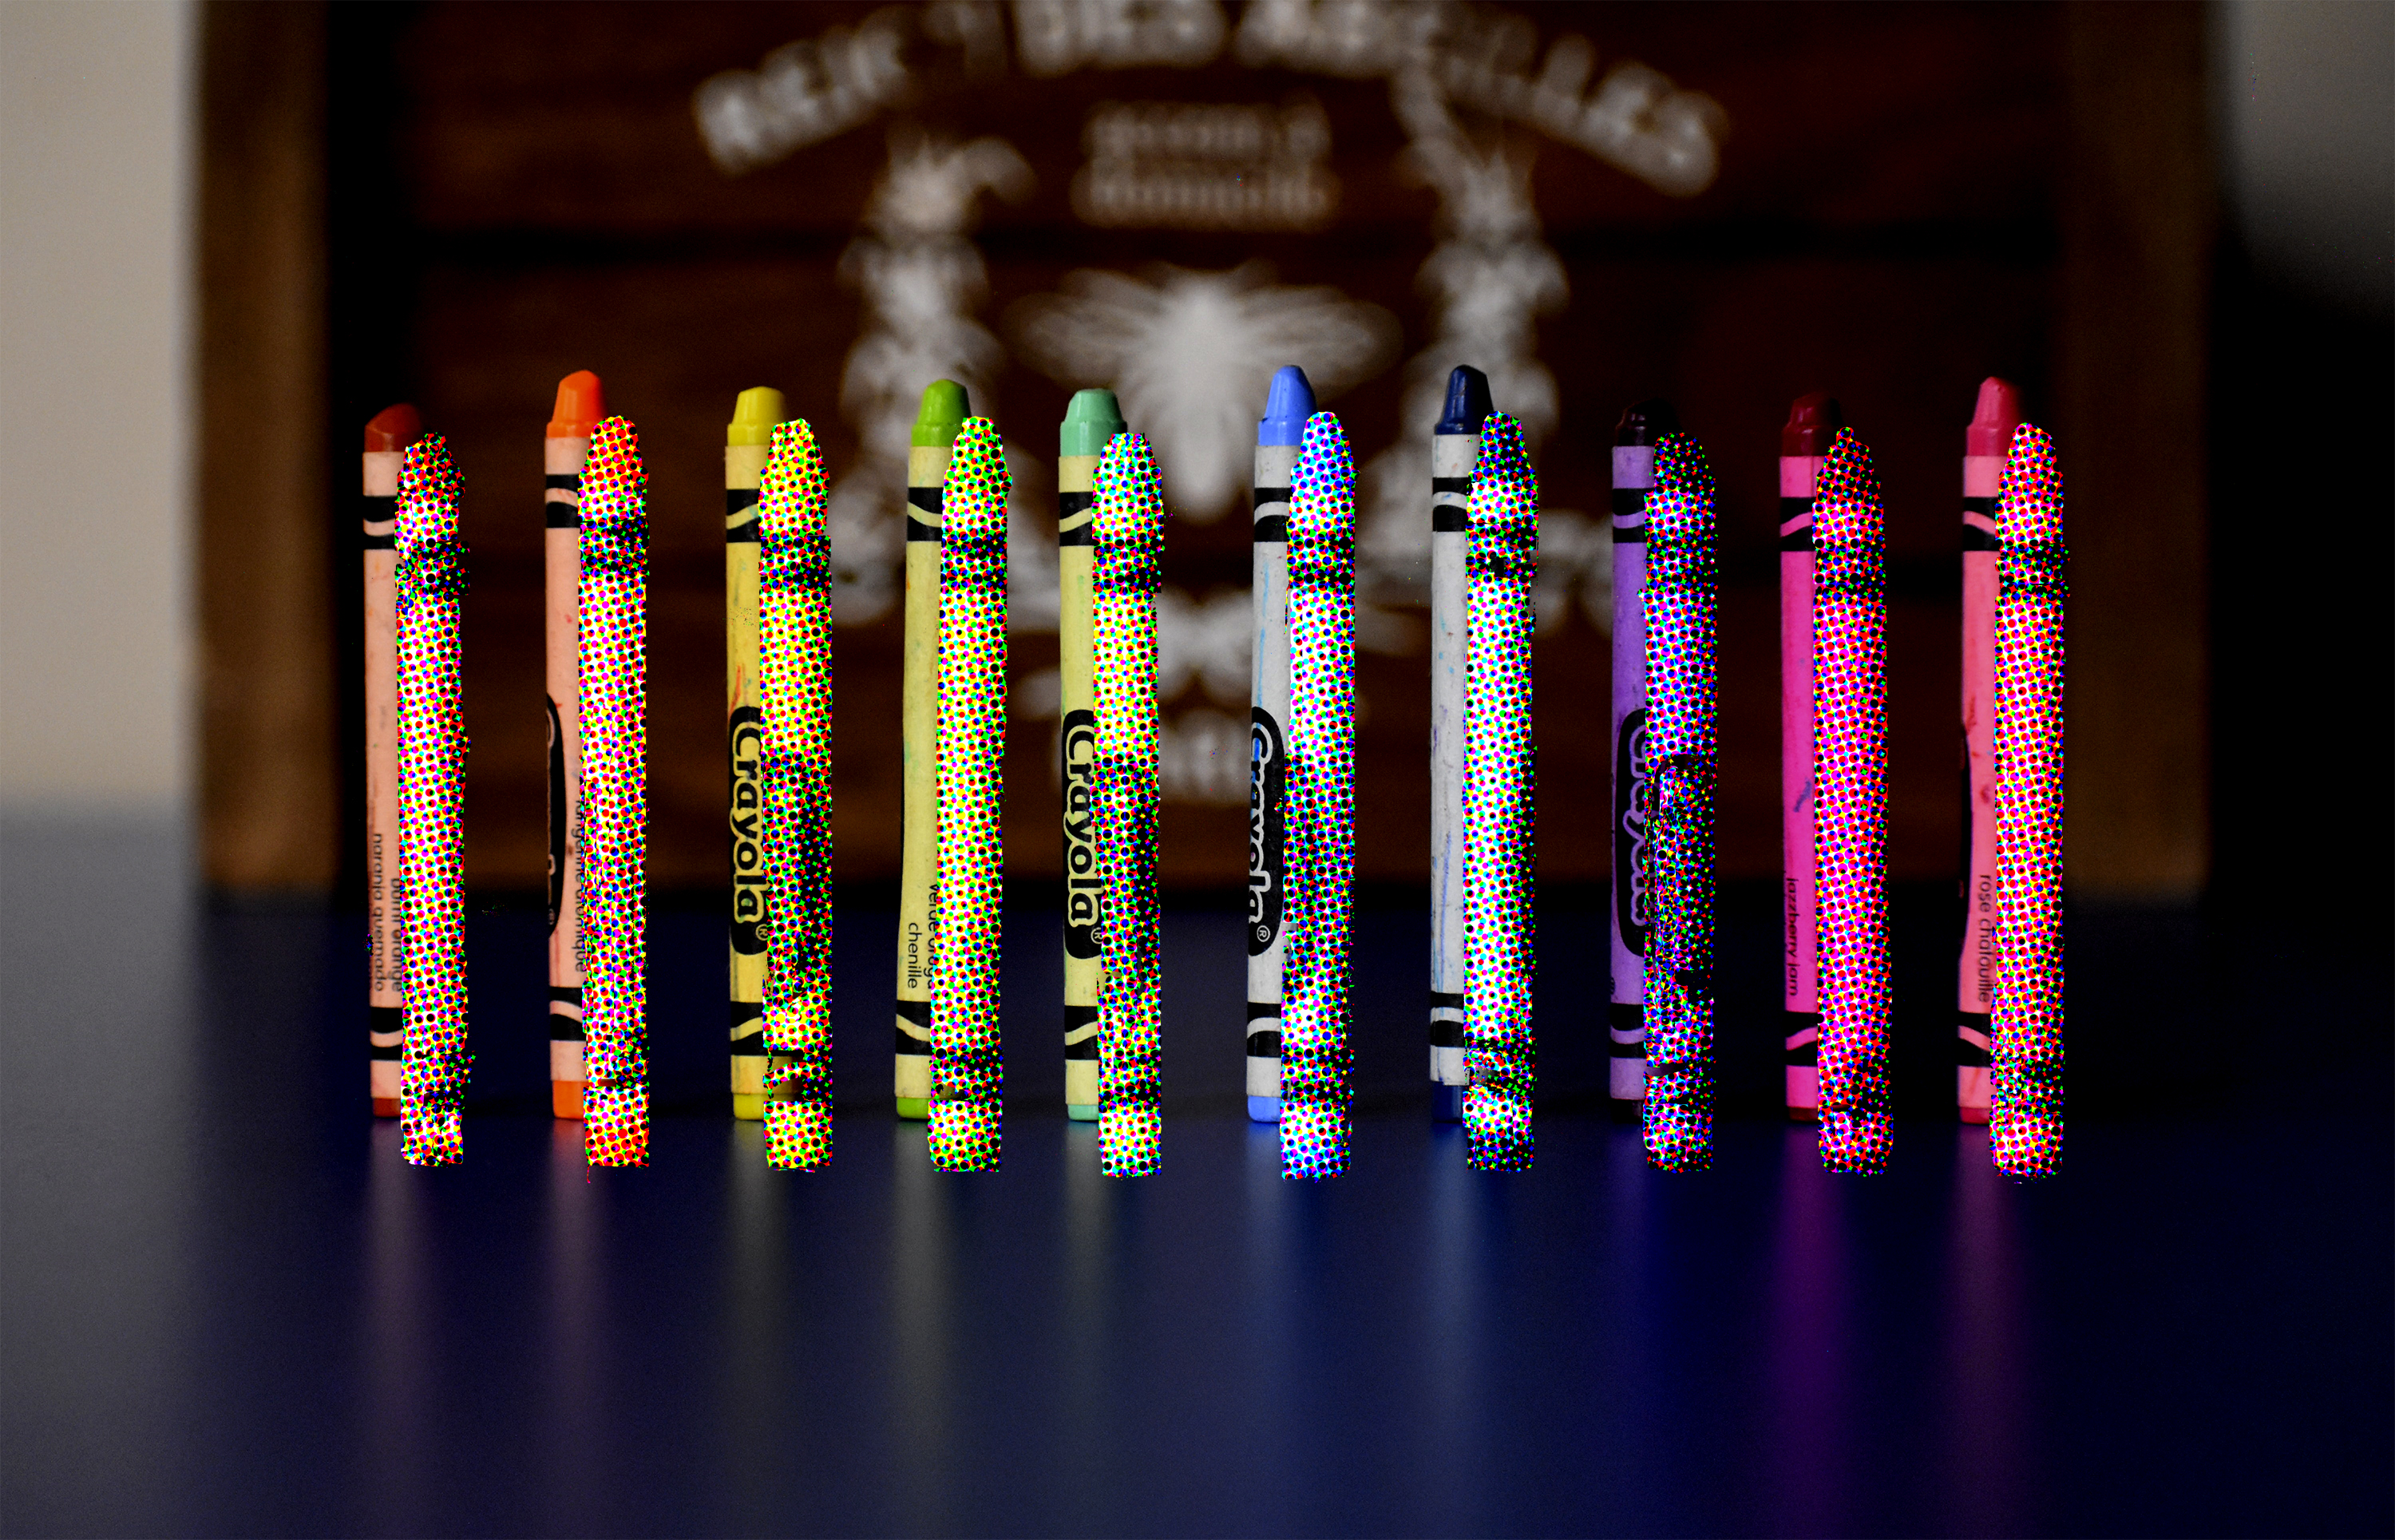 An illustration that includes a row of crayons.